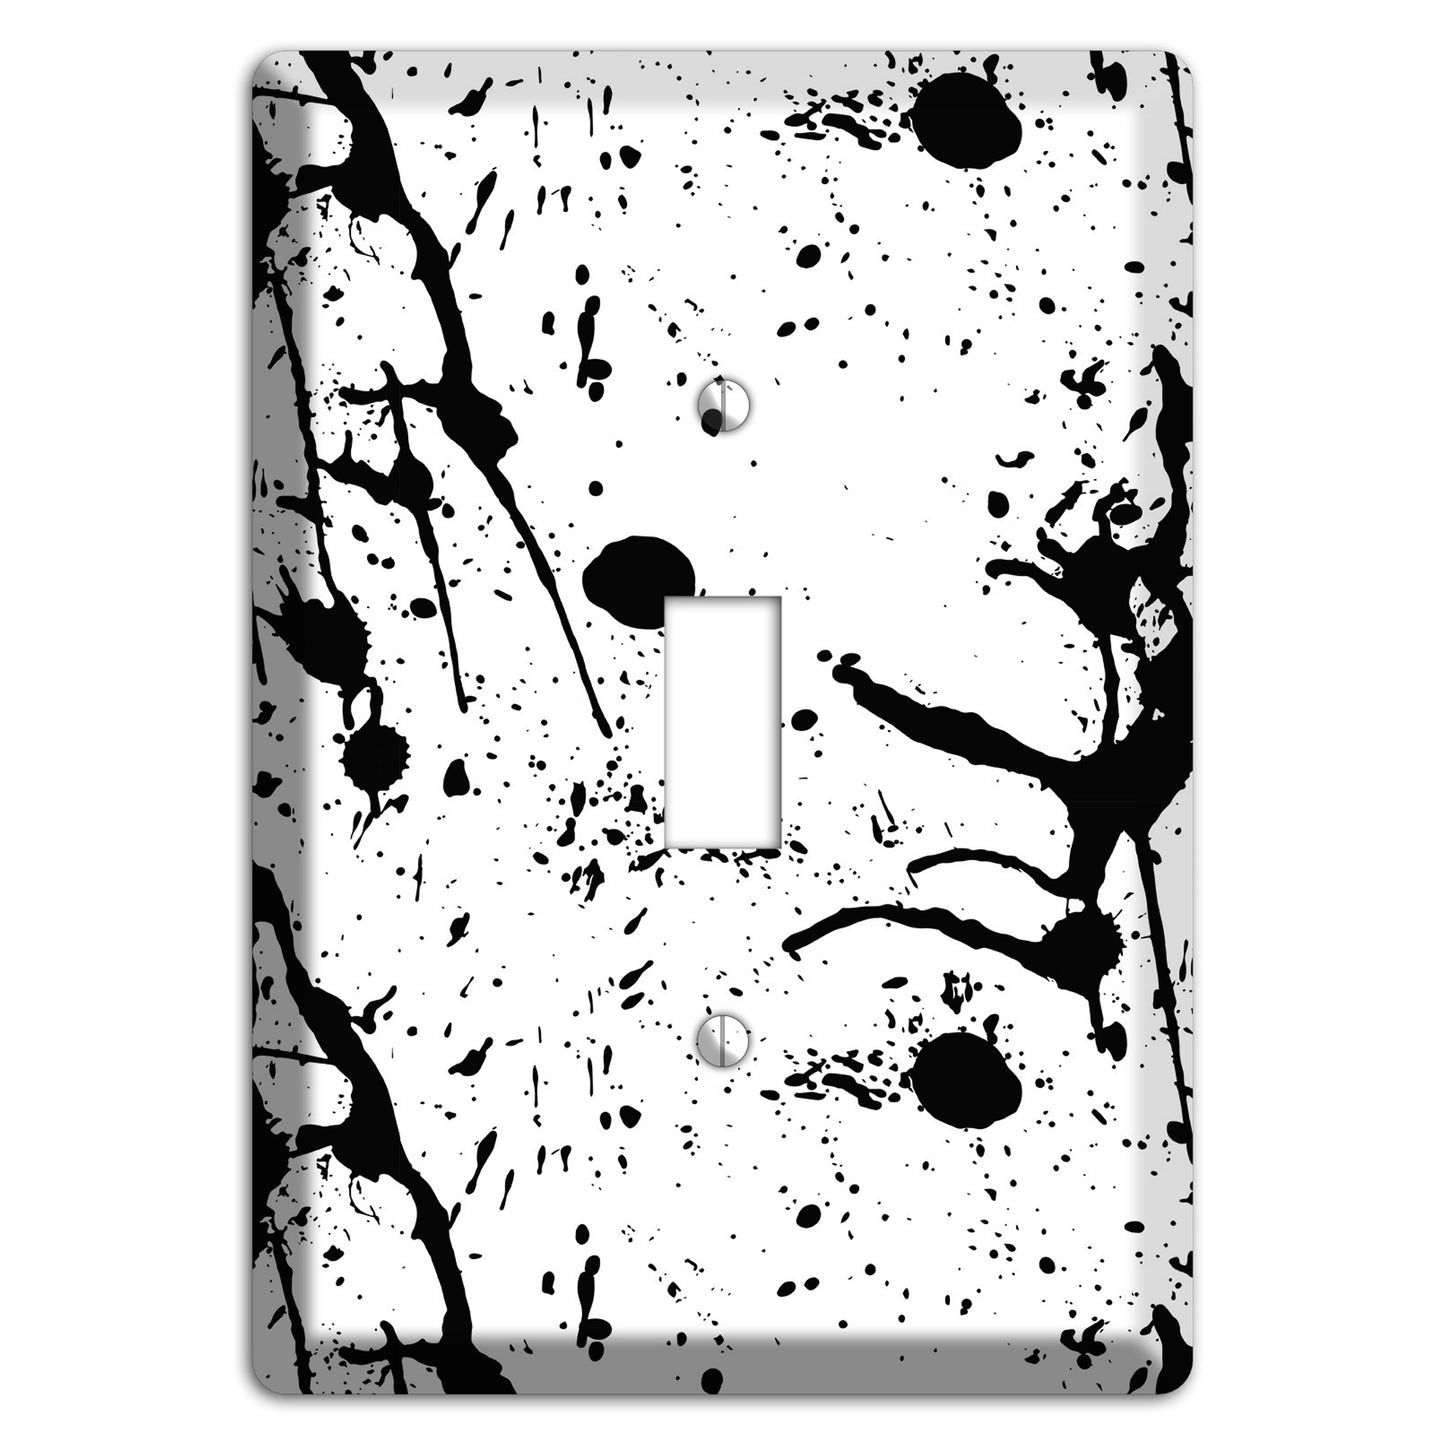 Ink Drips 8 Cover Plates